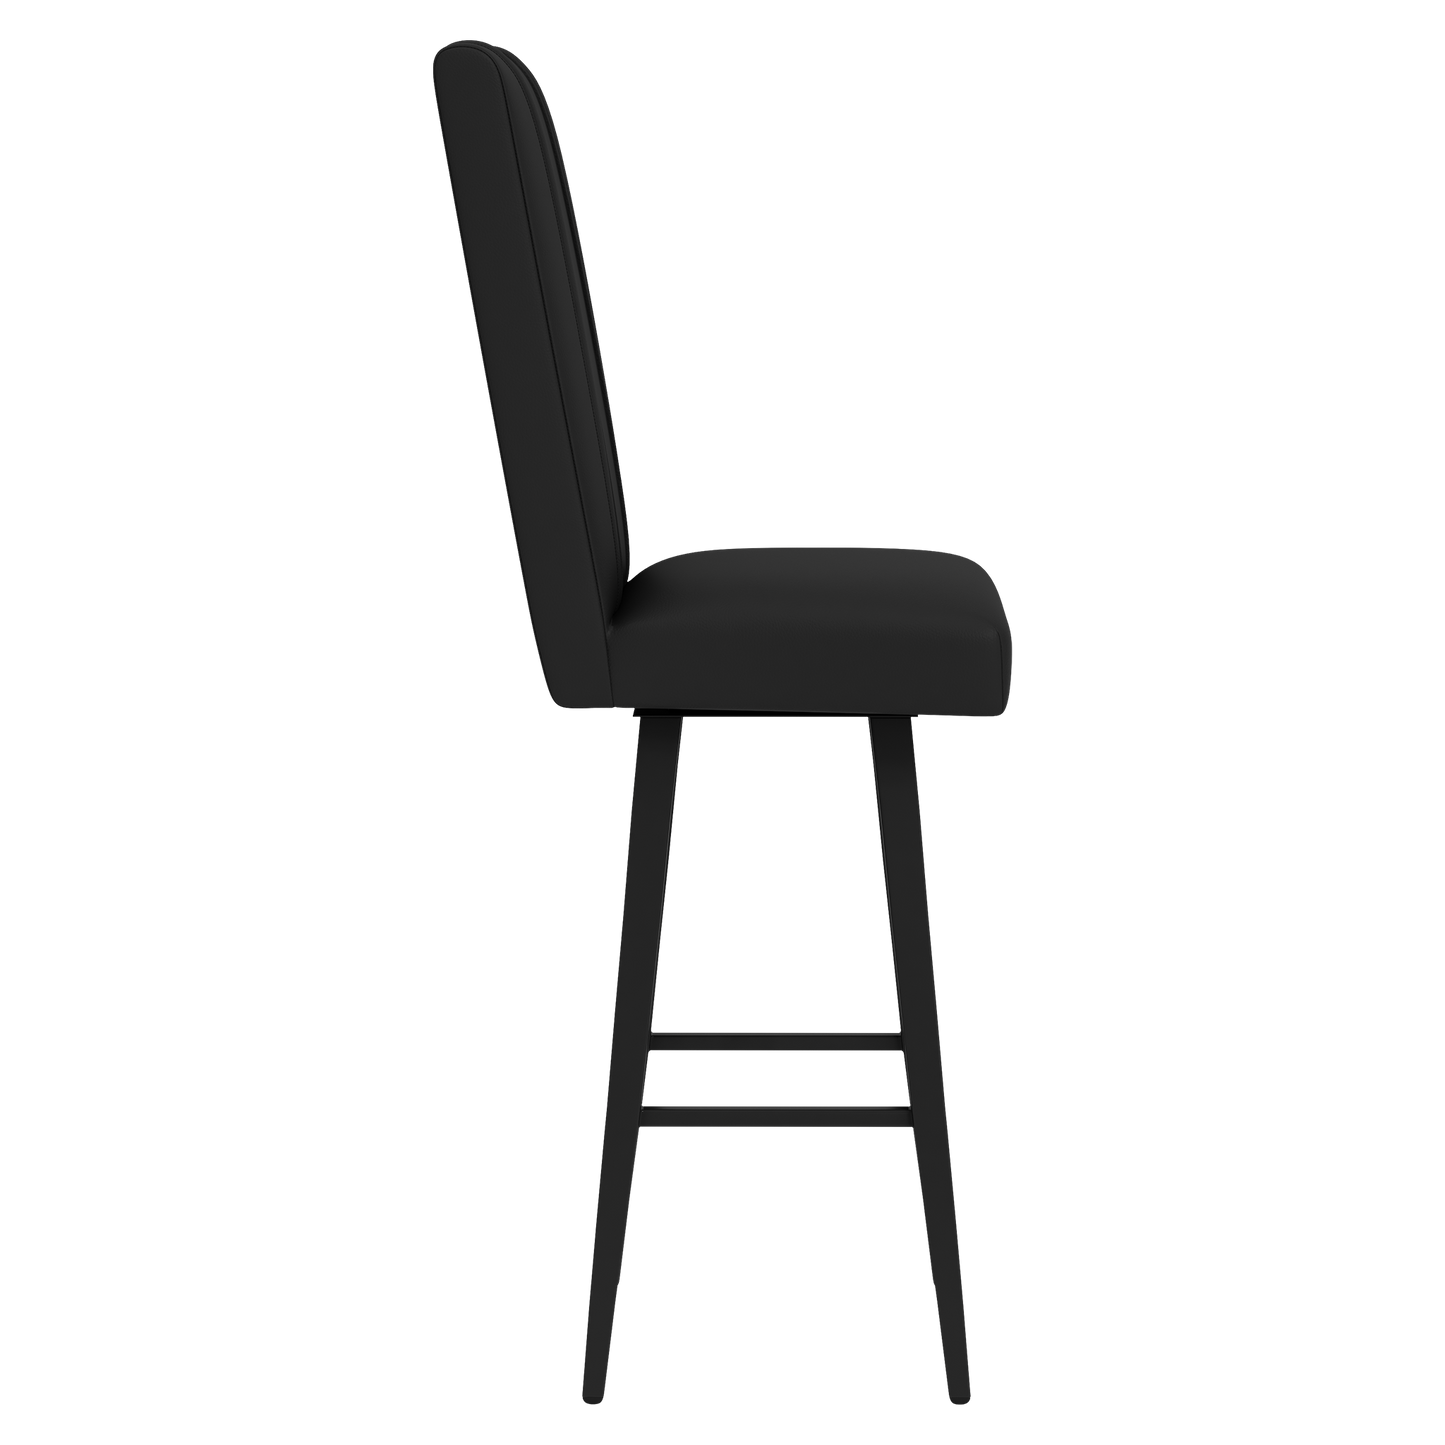 Swivel Bar Stool 2000 with New Orleans Pelicans Secondary